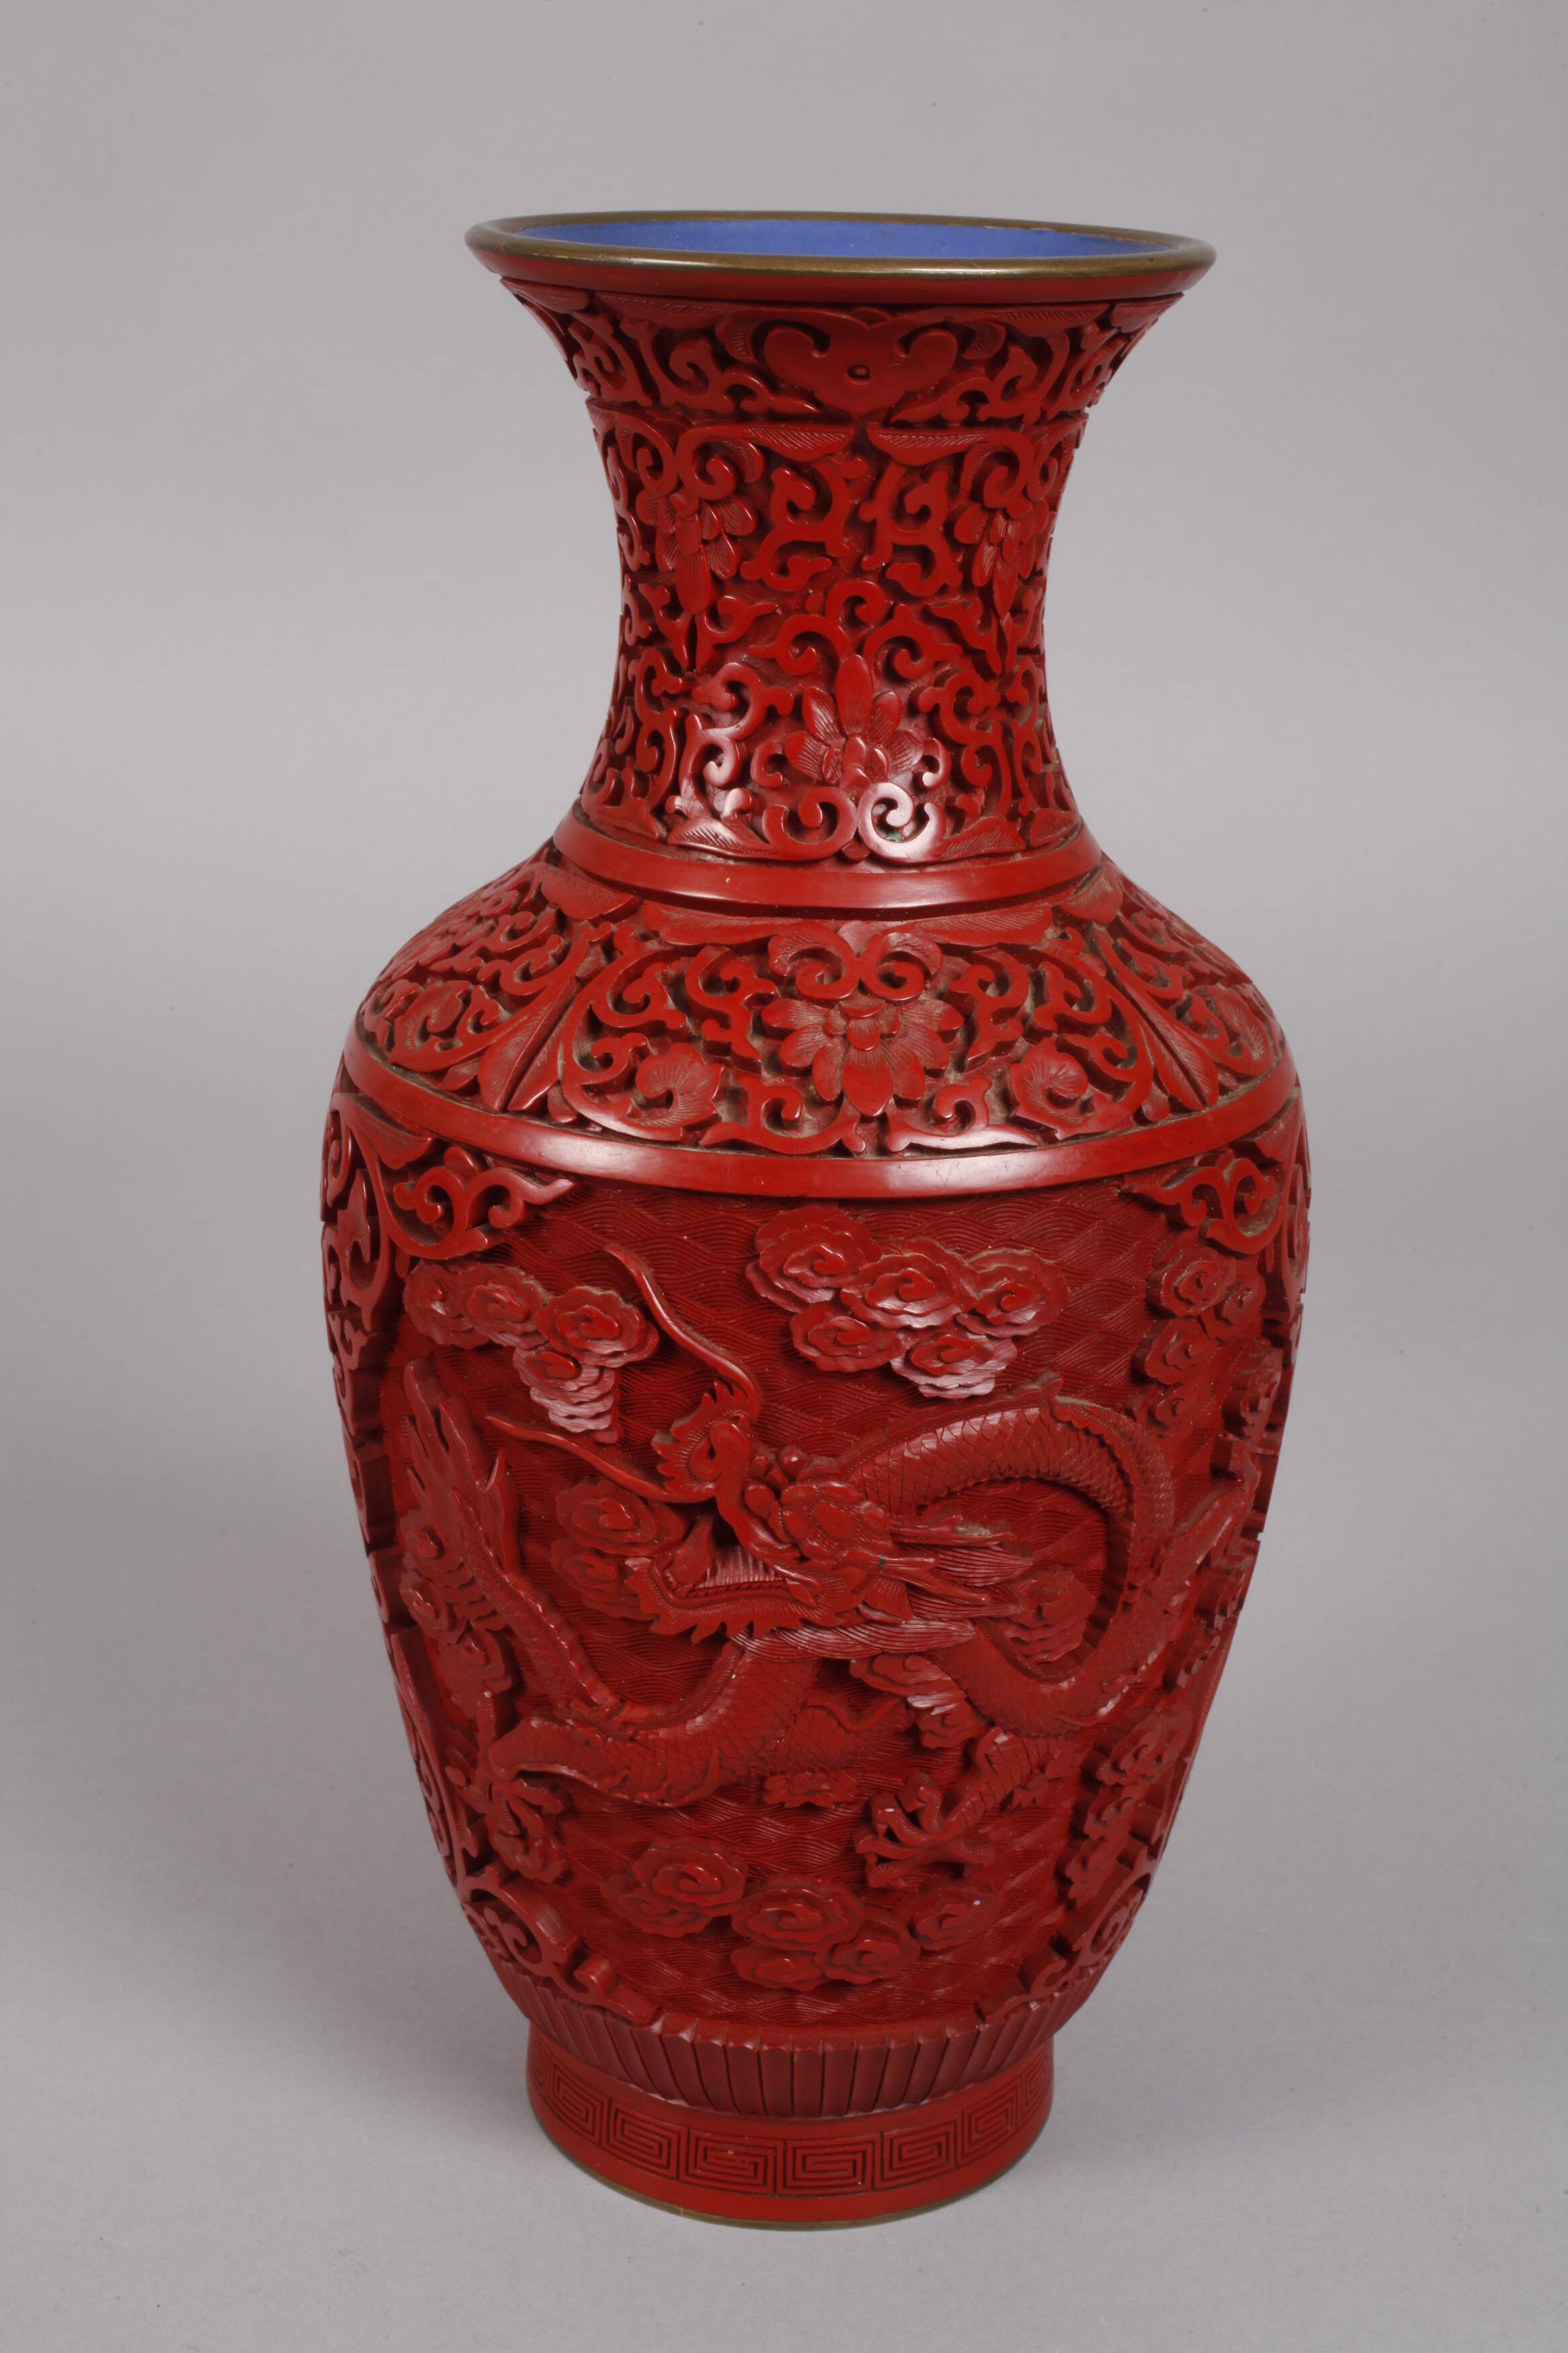 Pair of vases lacquer carving - Image 4 of 6